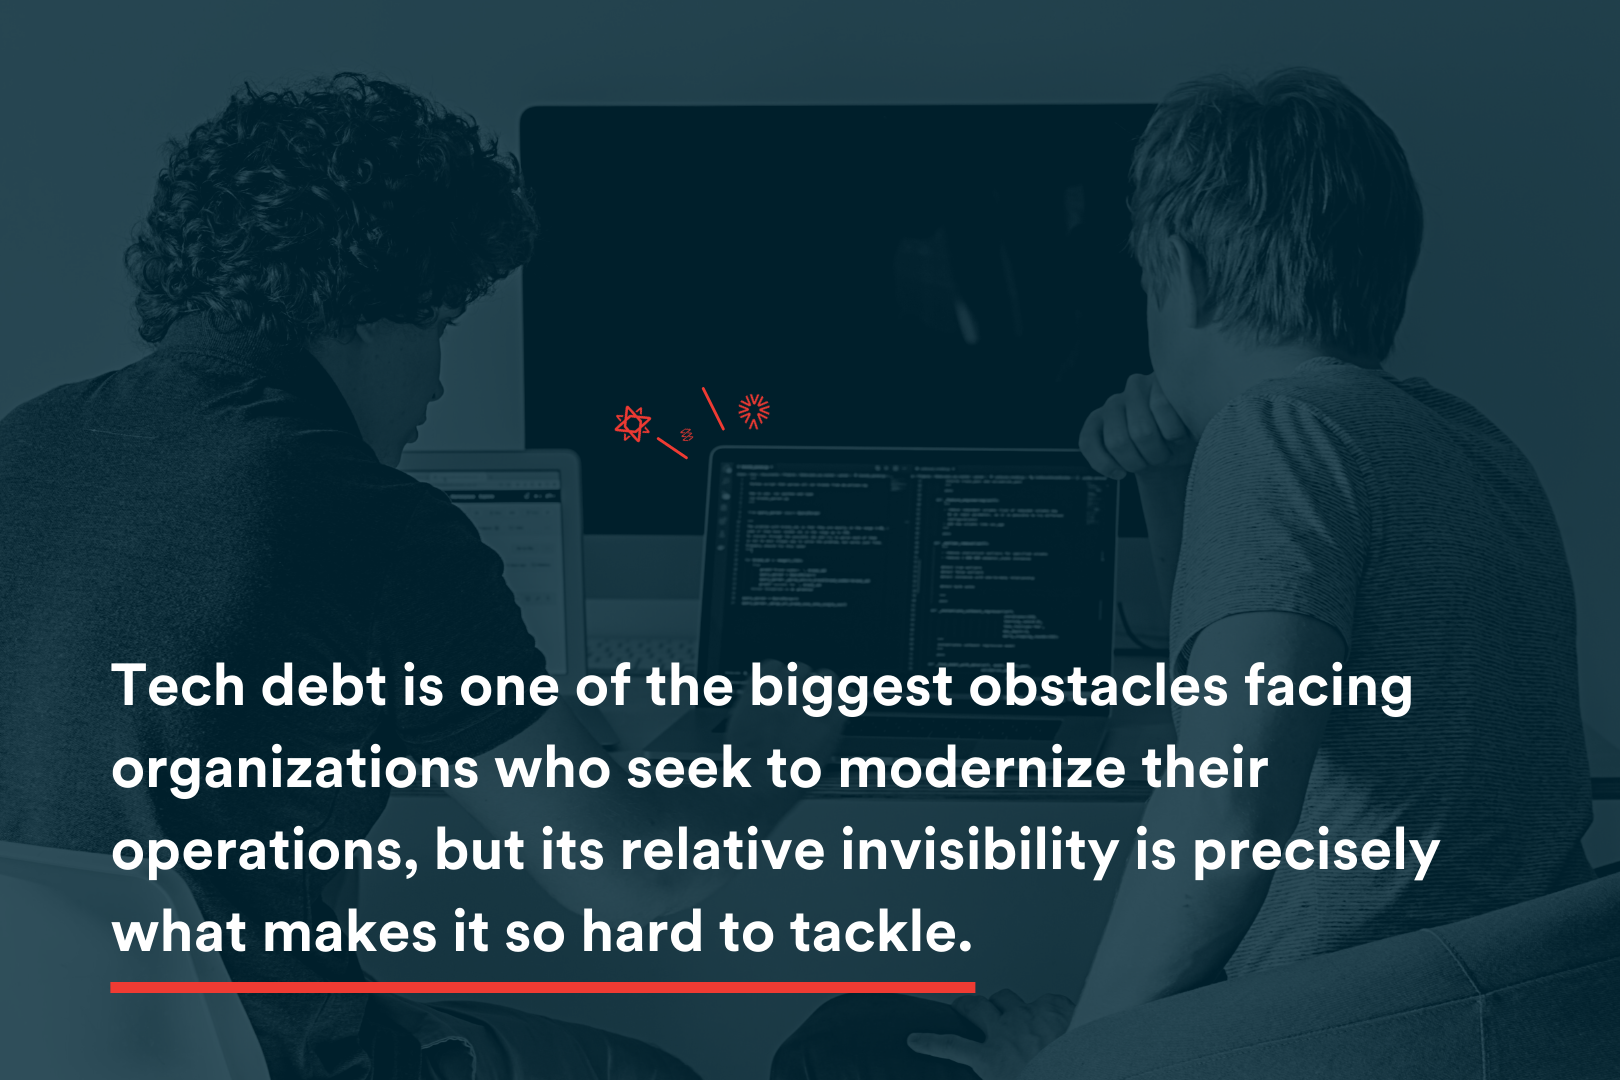 In Blog Image - Tech debt is one of the biggest obstacles facing organizations who seek to modernize their operations, but its relative invisibility is precisely what makes it so hard to tackle.